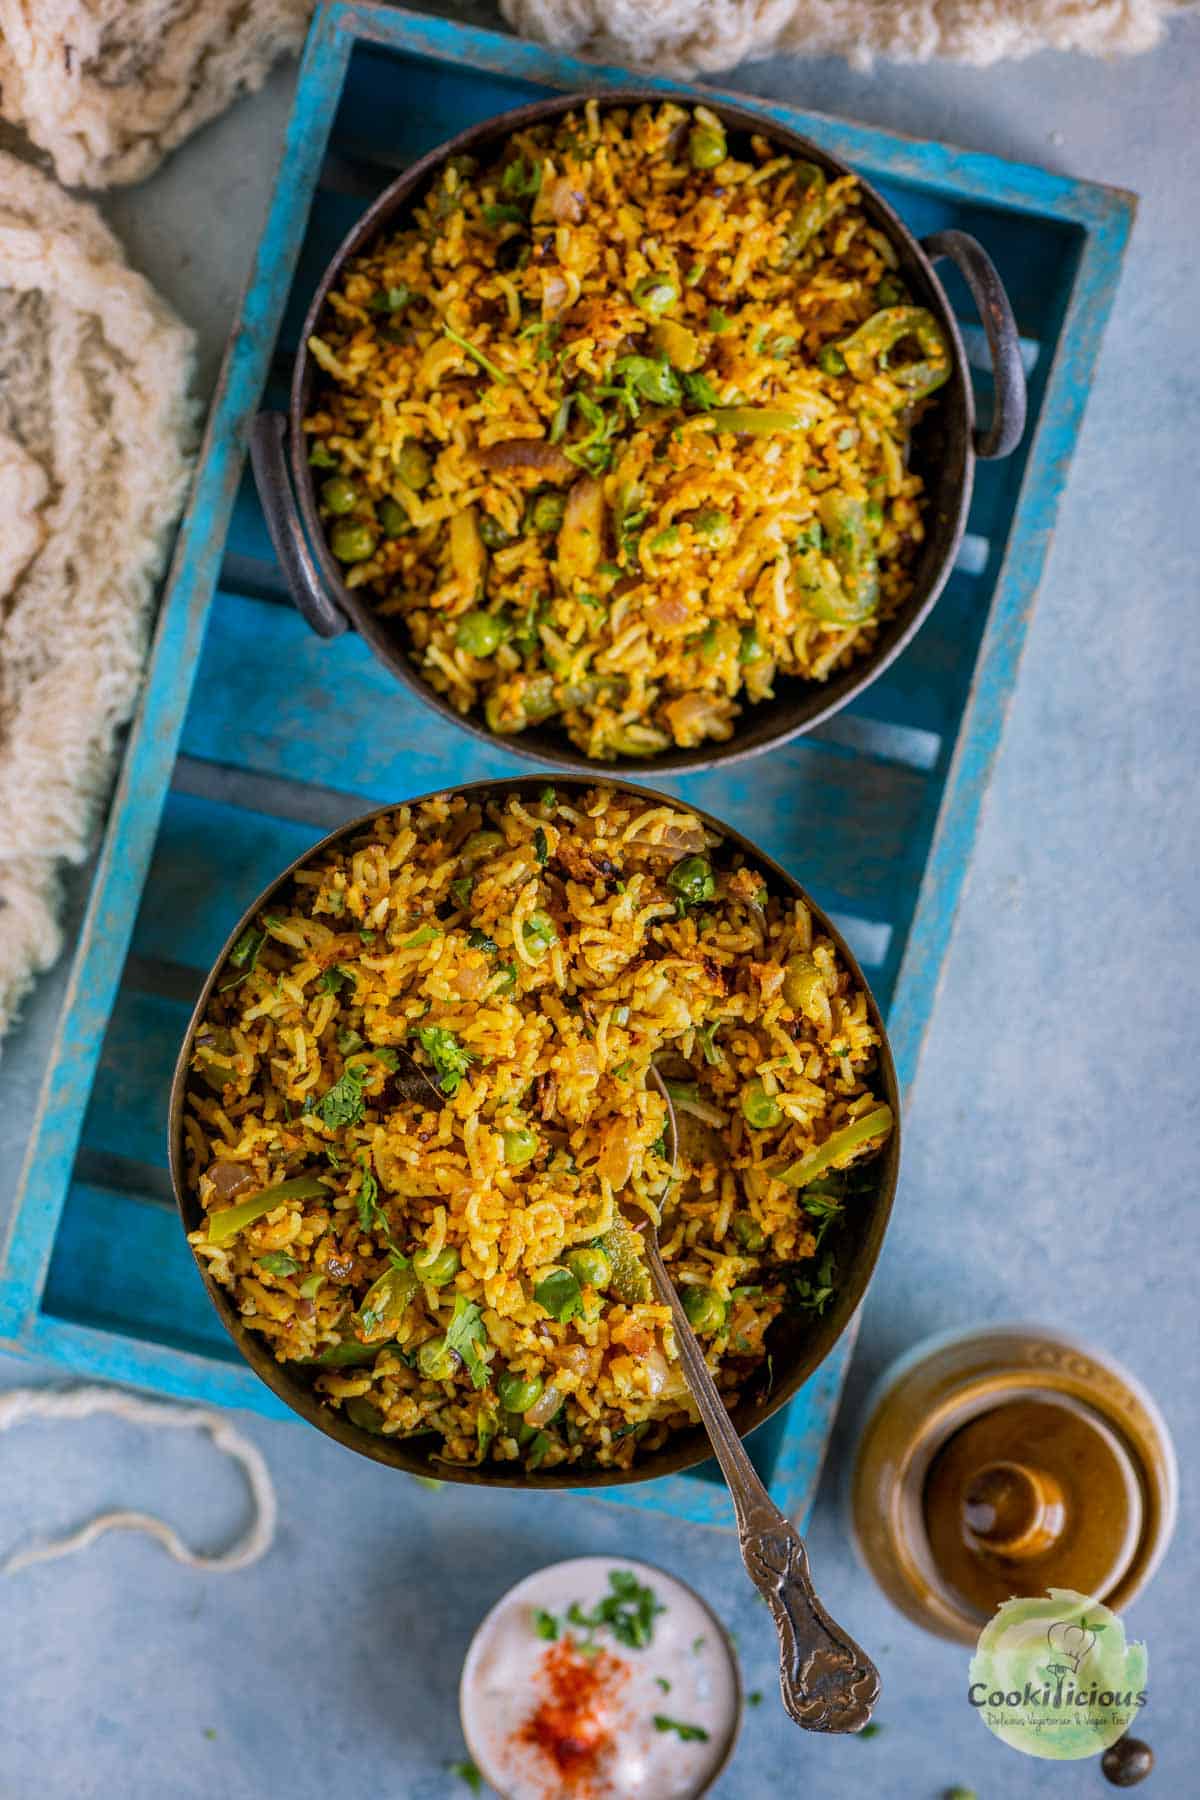 2 bowls of capsicum rice served in a tray